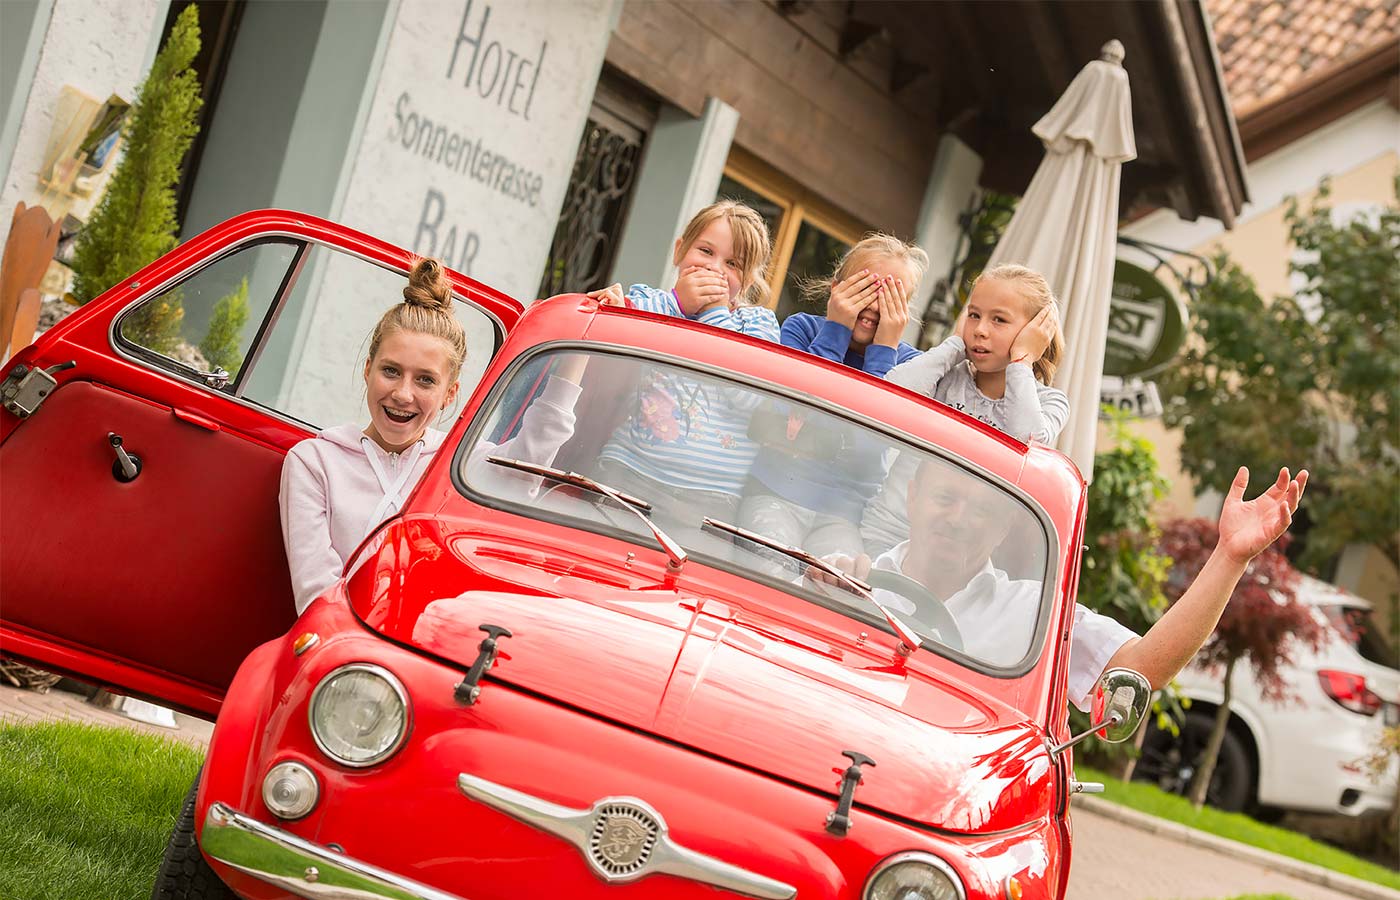 Four children in fun poses on a historic red vehicle in front of the Hotel Alpenhof in Saltusio